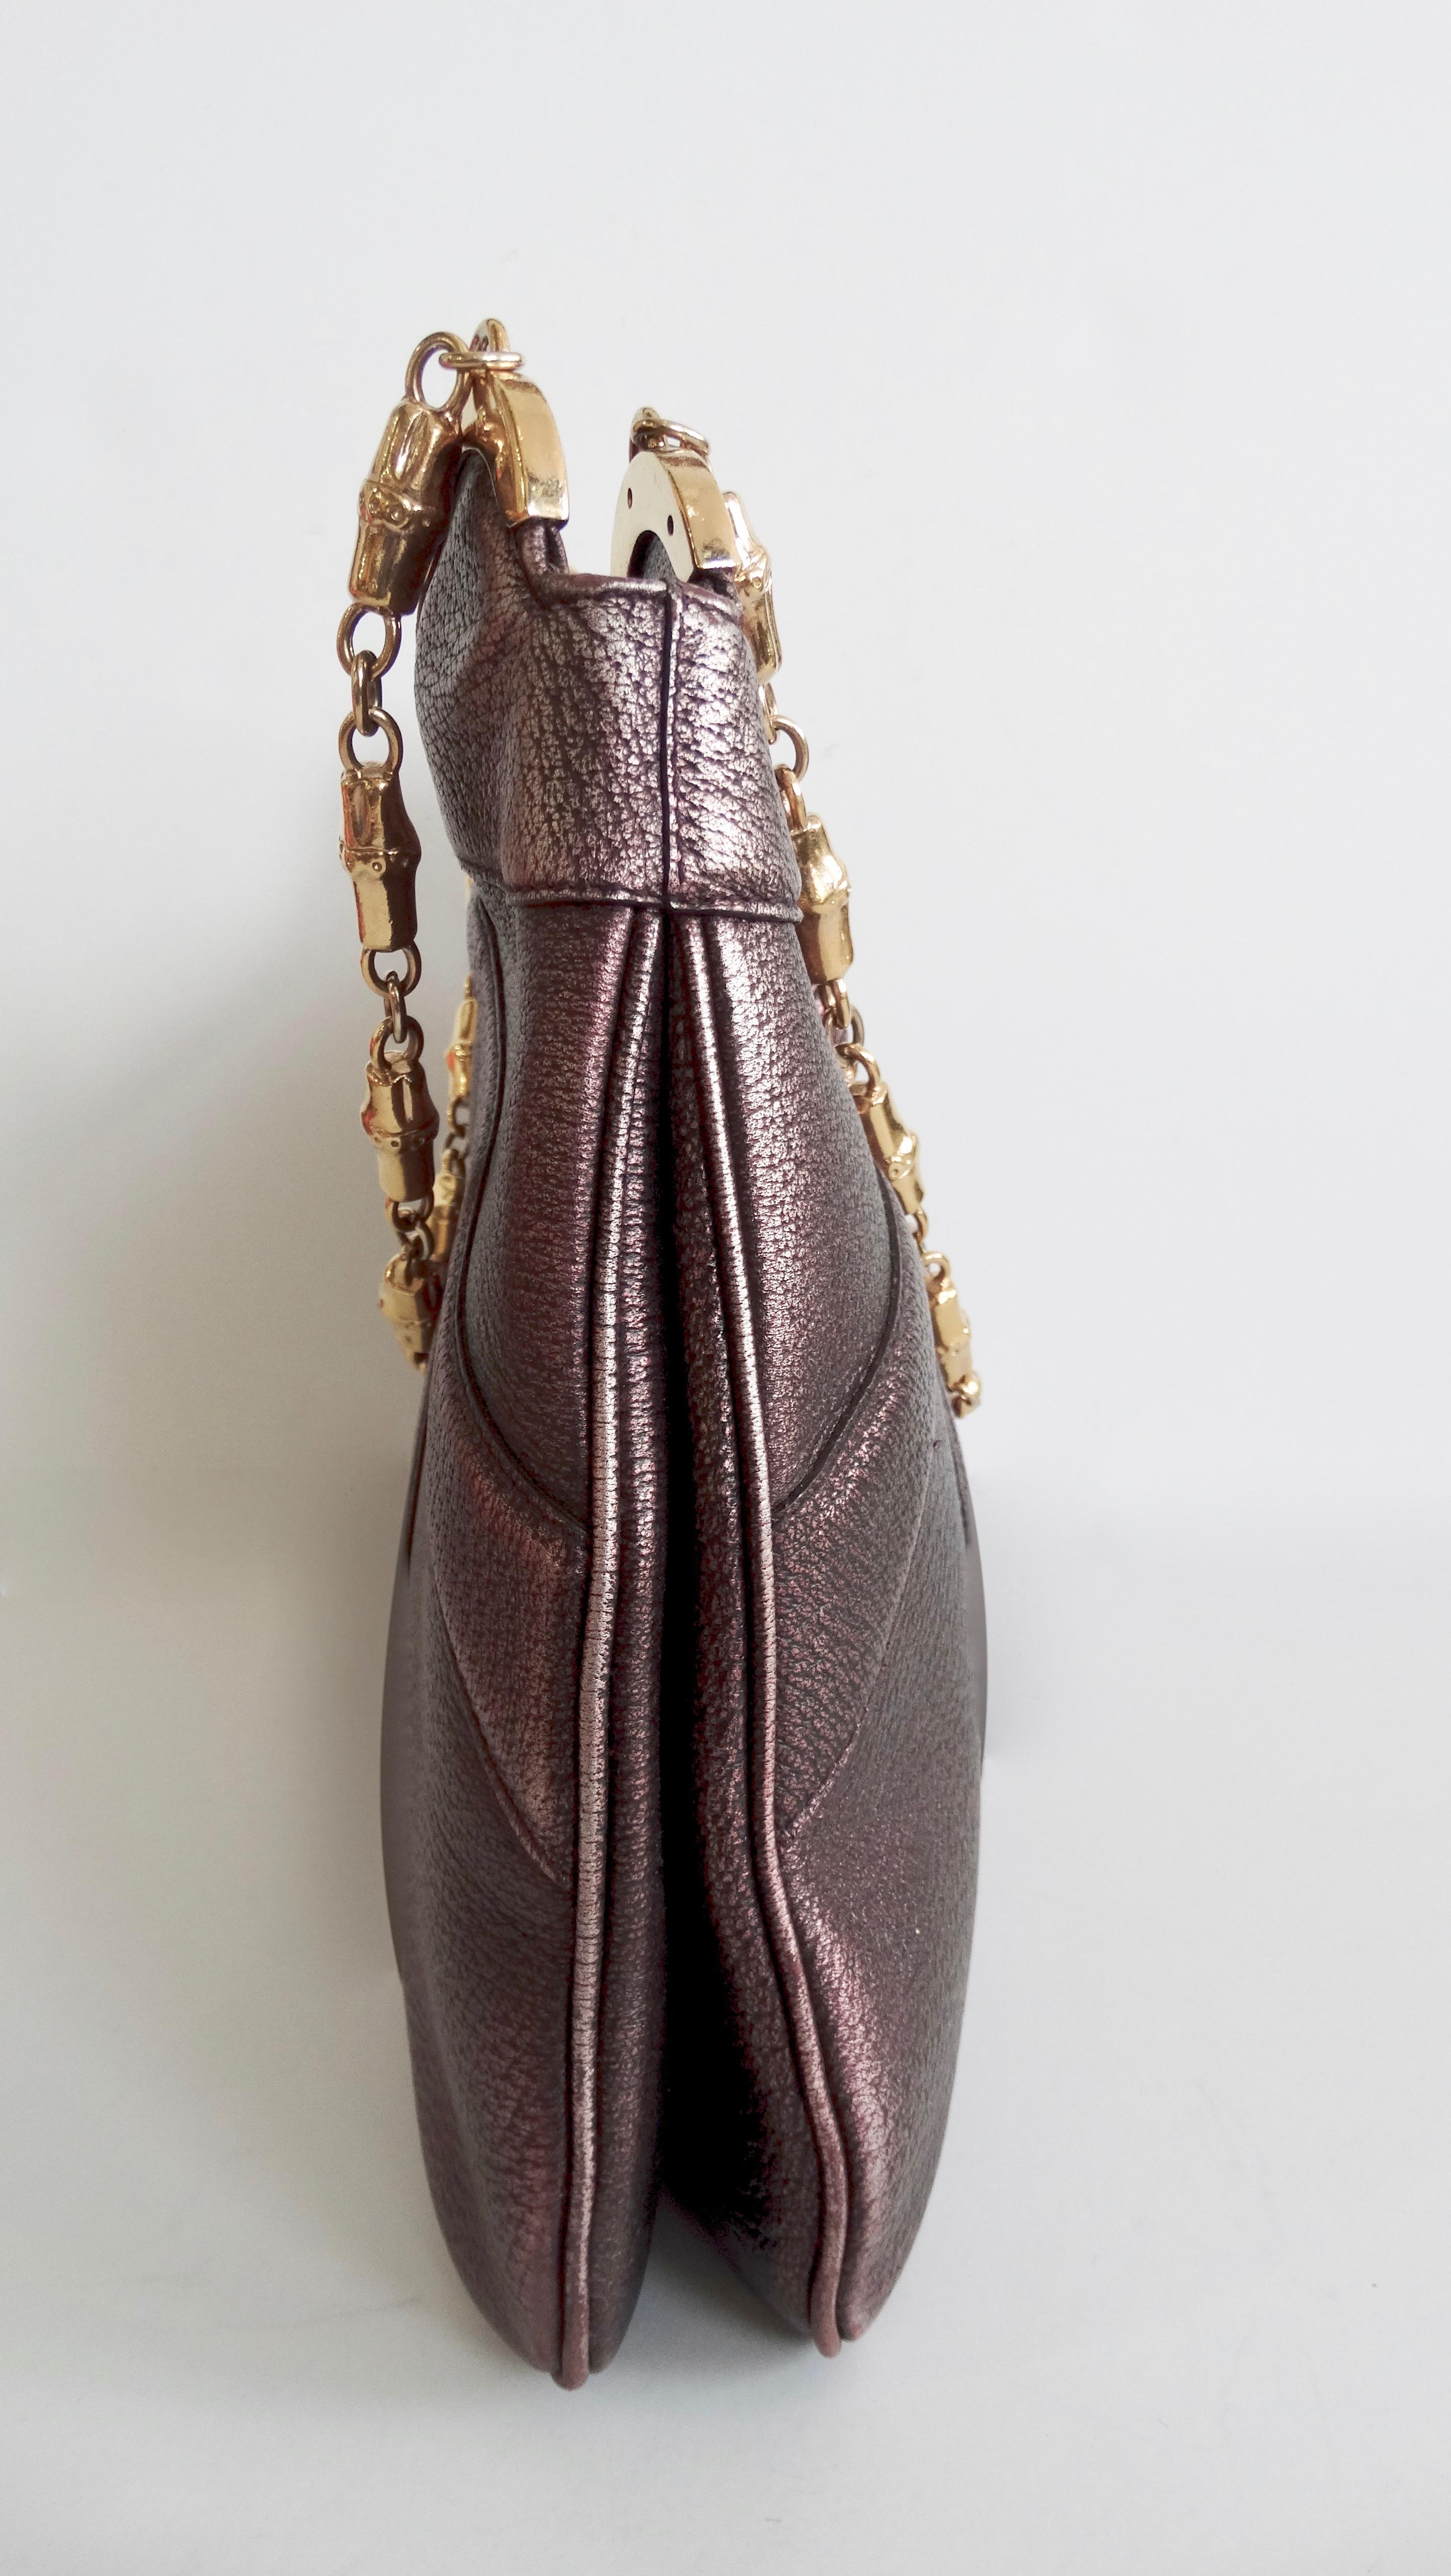 Walk around with a piece of Gucci fashion history! Circa 2000s, this gorgeous metallic purple leather shoulder bag is from the infamous Tom Ford for Gucci era and features gold toned hardware throughout. Includes leather crafted detailing, a snap